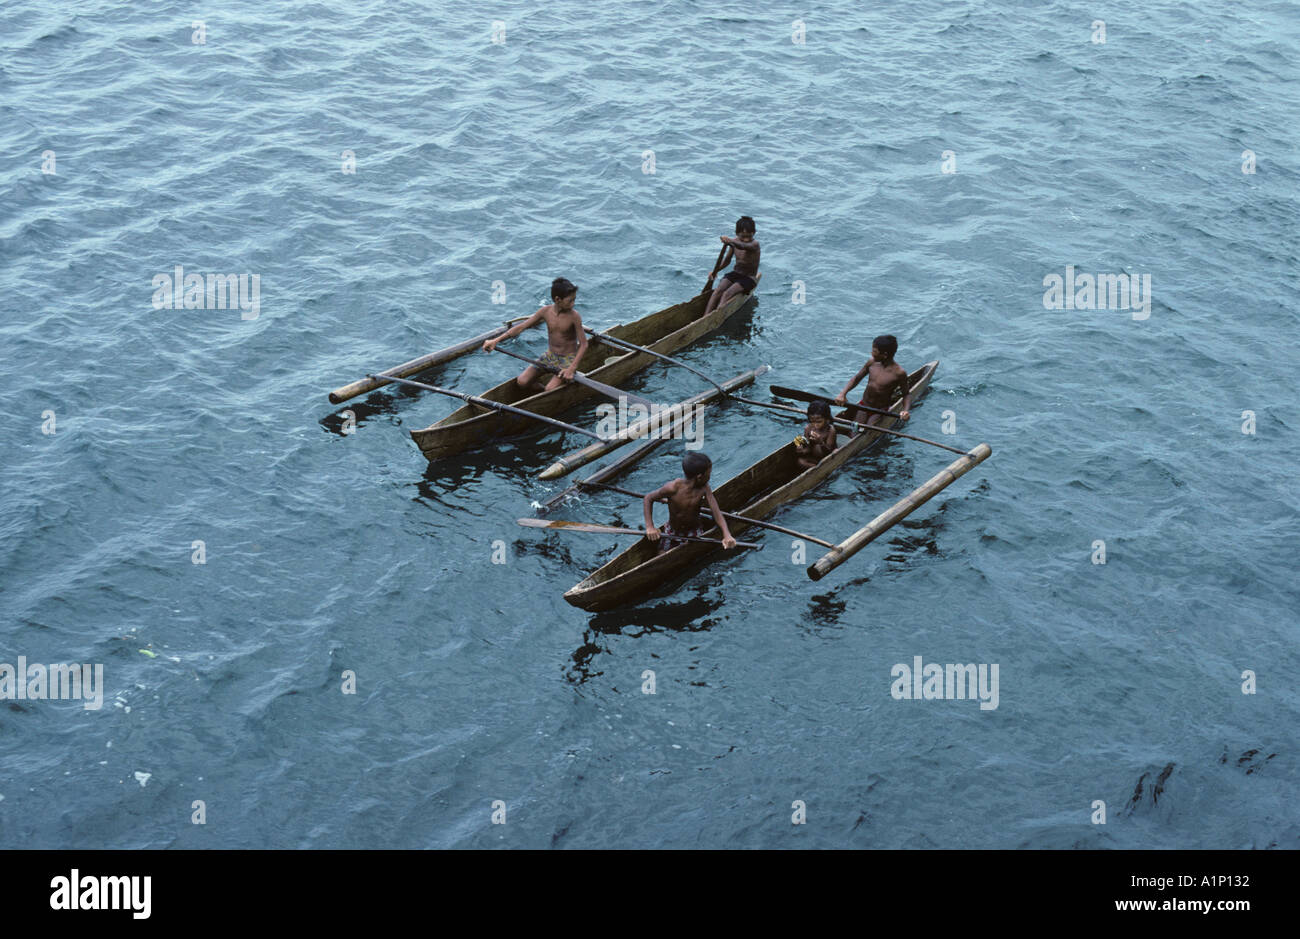 Badjao Badjau or Tau Laut sea gypsies Children Basilan Island Mindanao Philippines In outrigger canoe Dive for coins in water Stock Photo